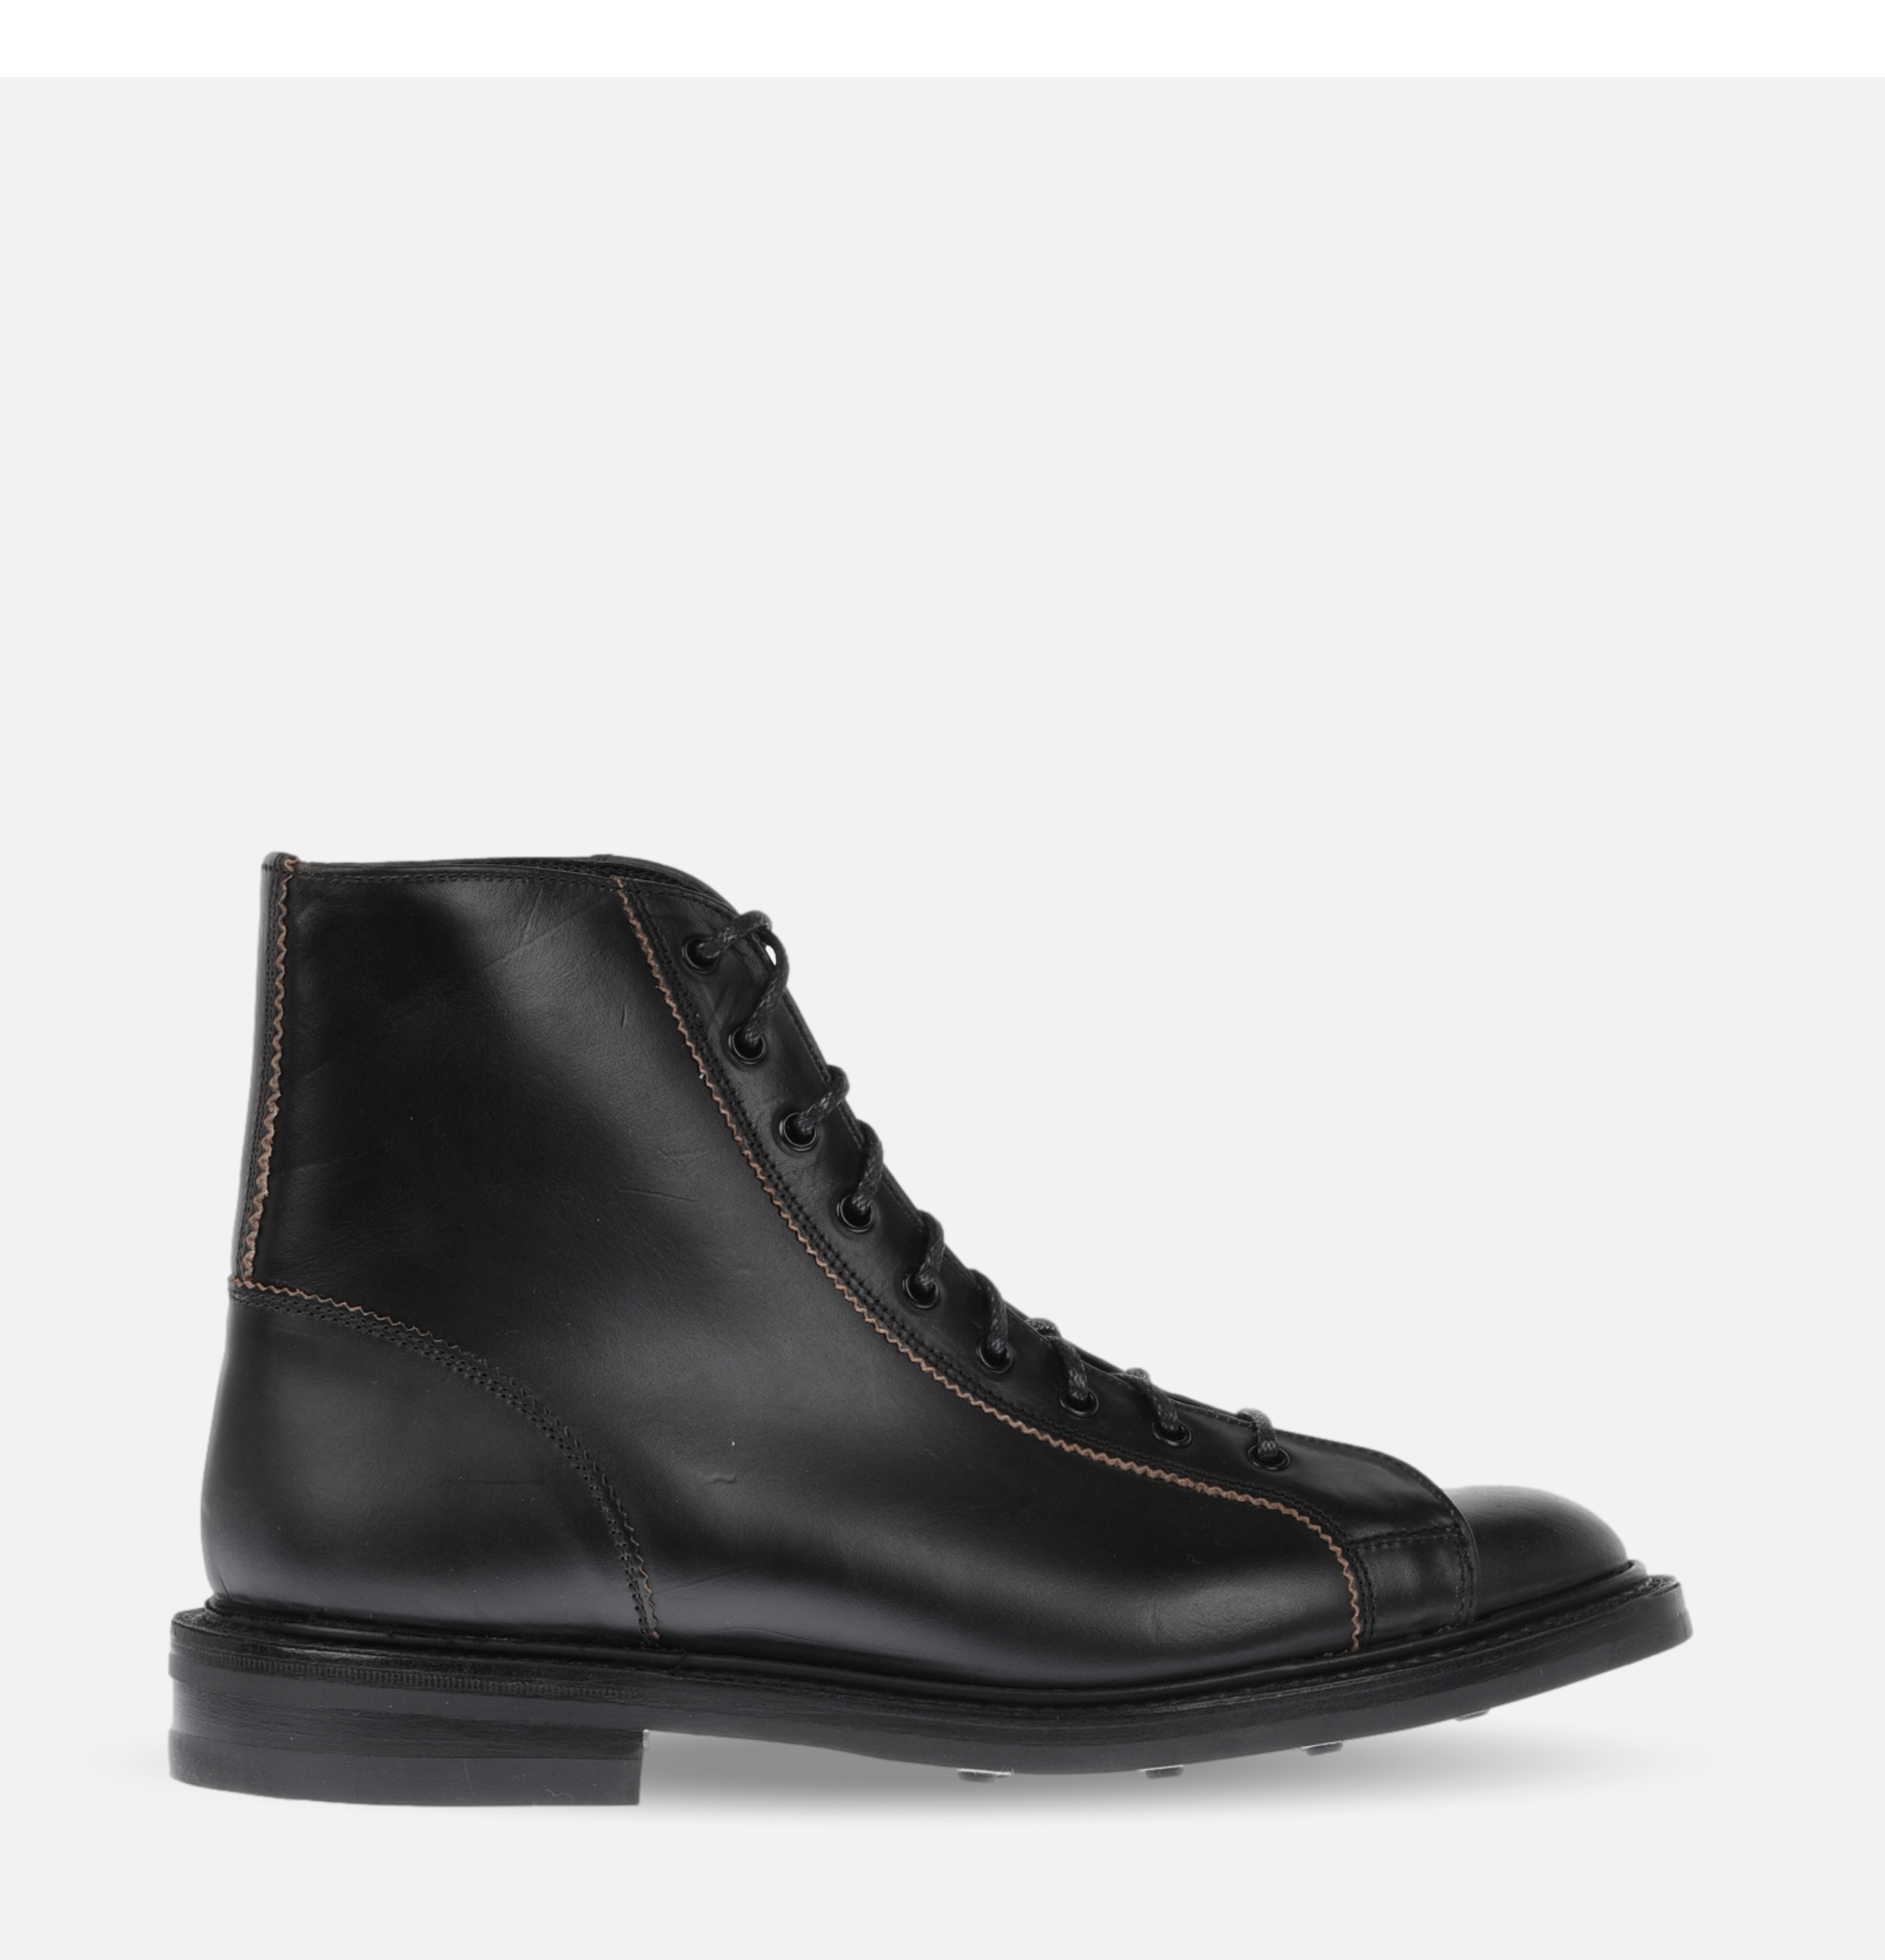 Trickers Ethan Monkey Boots Black